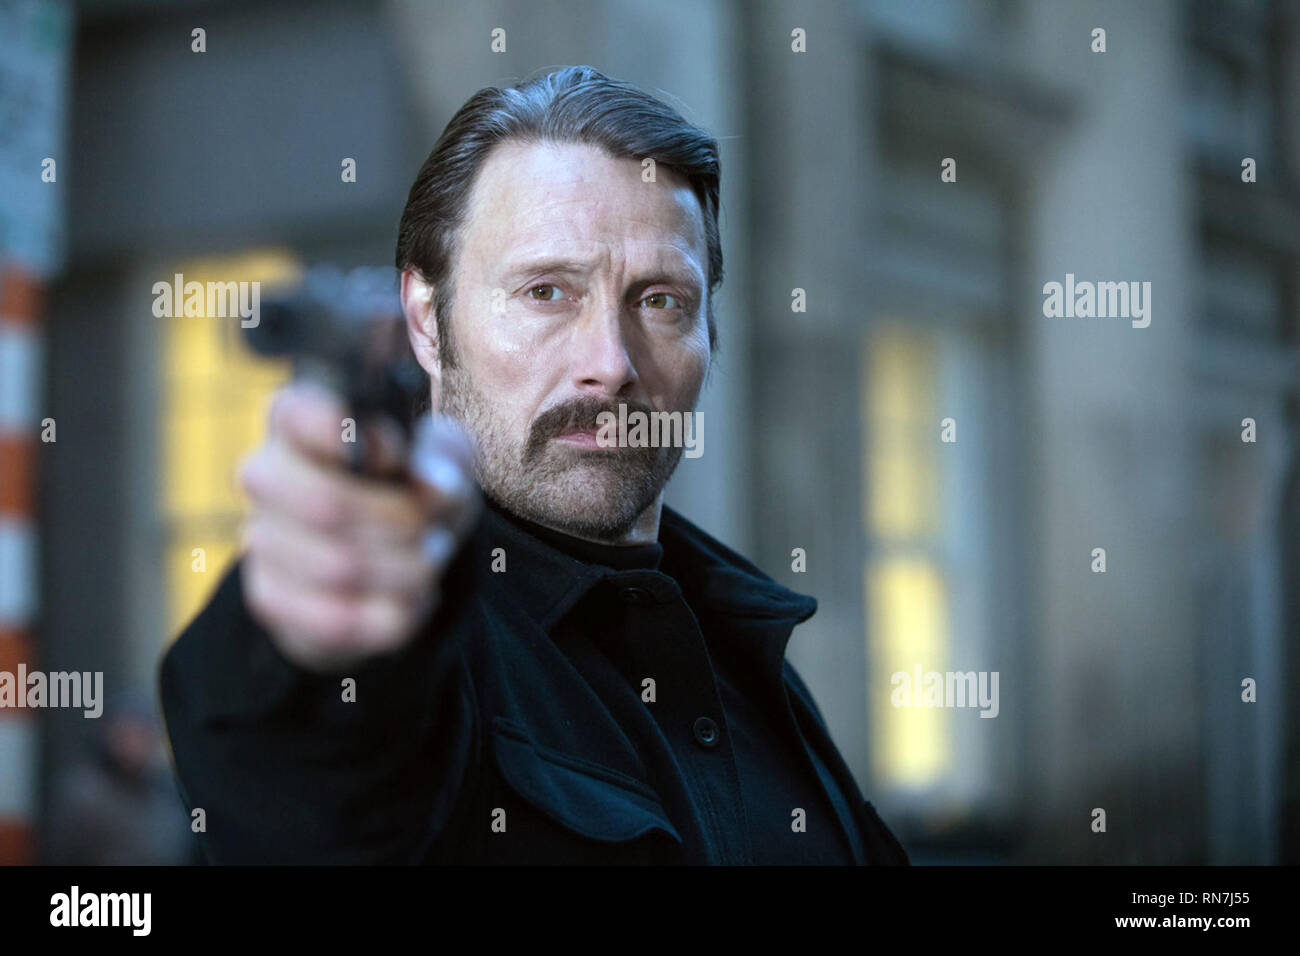 Neo Noir High Resolution Stock Photography and Images - Alamy